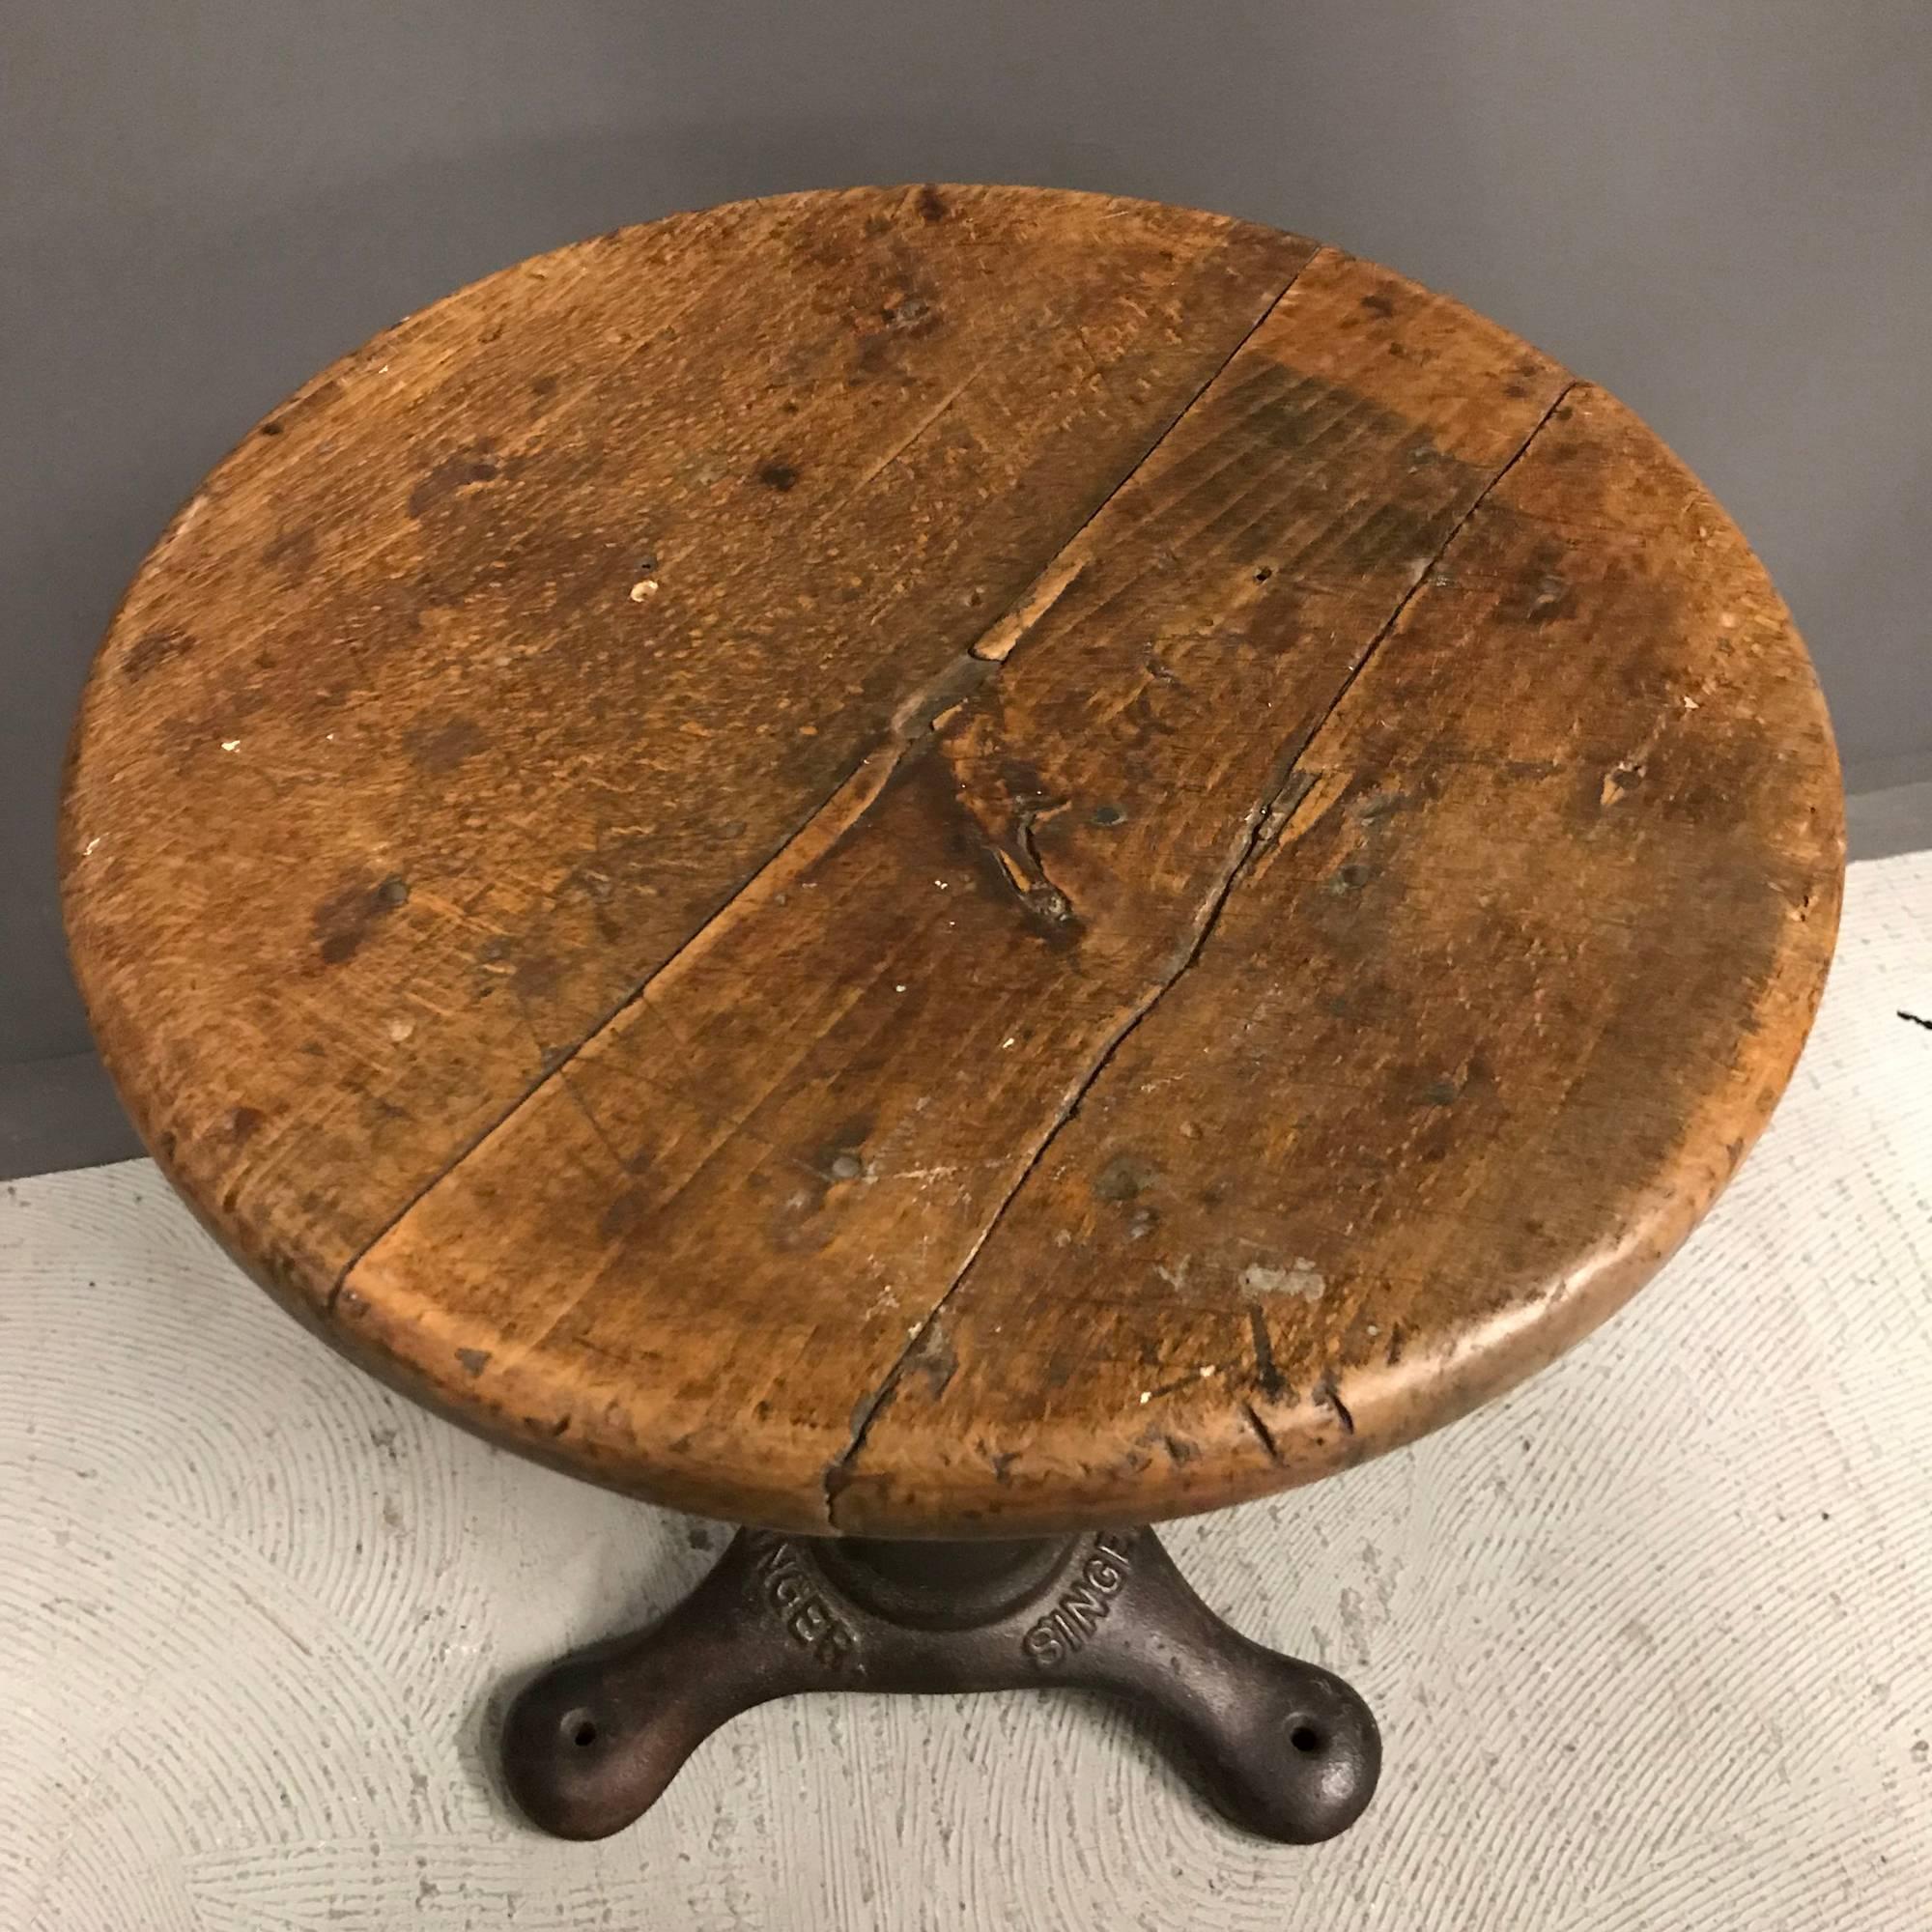 Industrial workshop stool by Singer. Heavy cast iron base with solid oak top. Made in France during the 1930s. This stool remains in good condition.